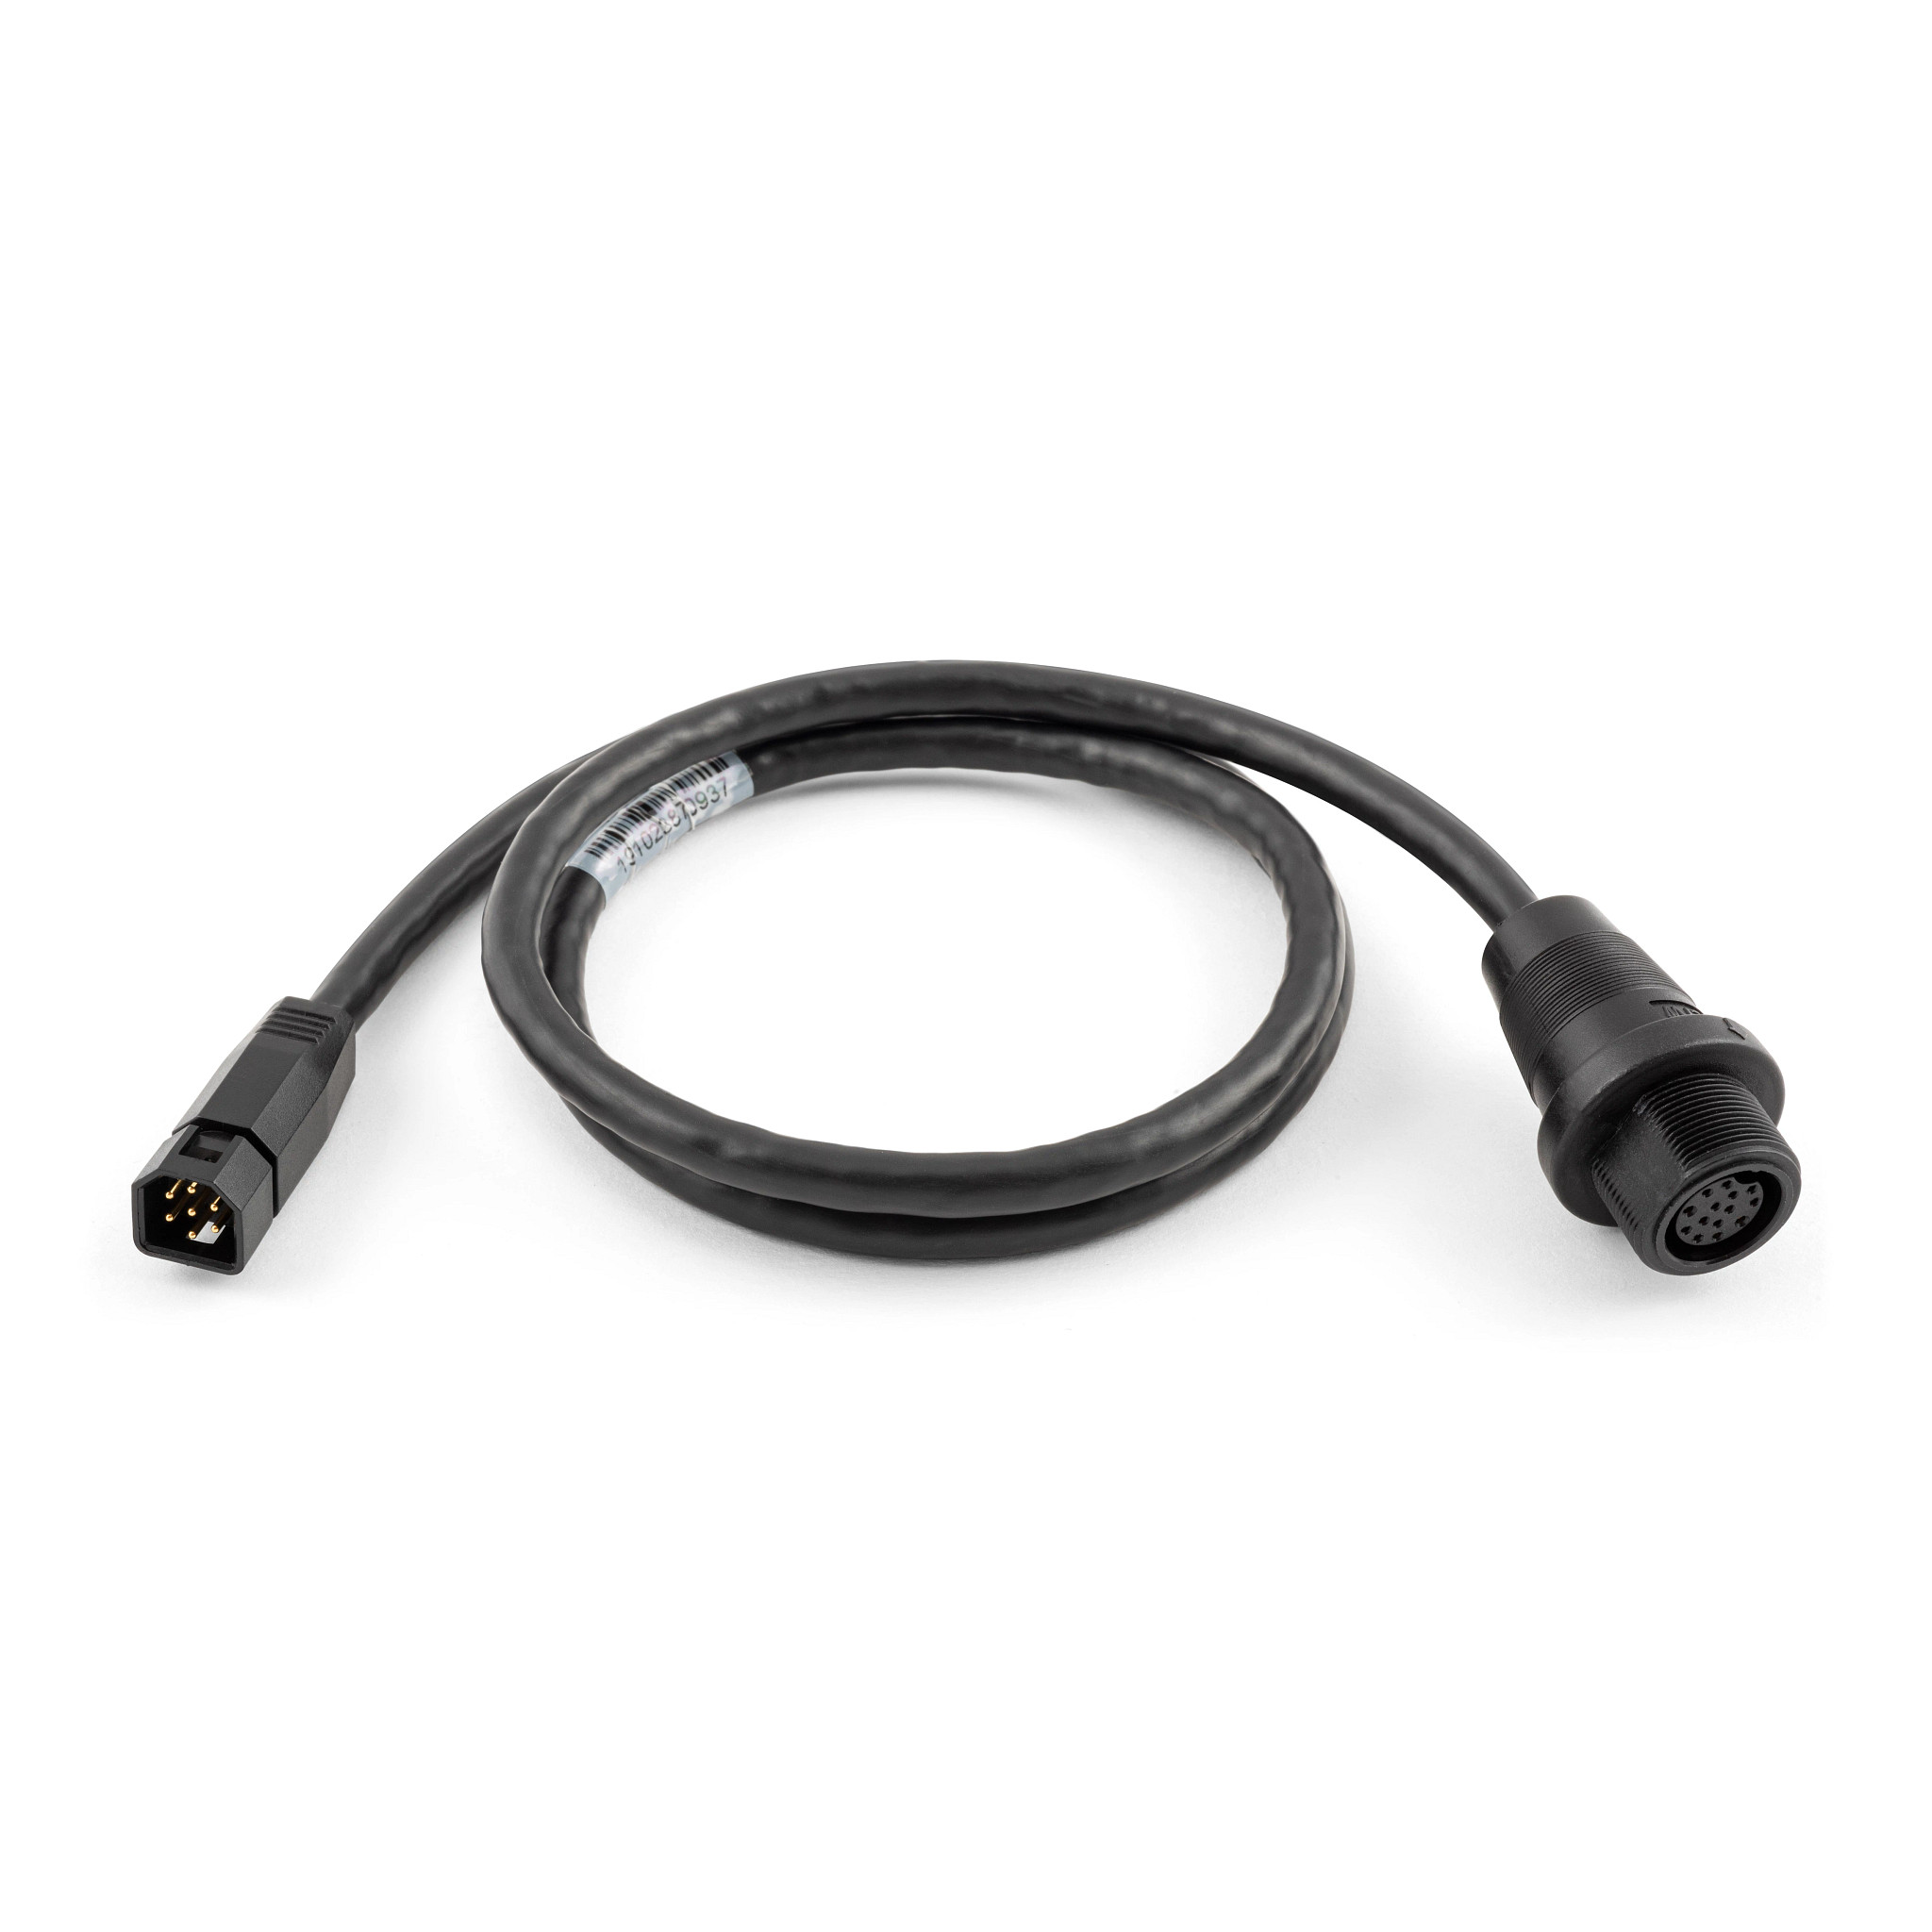 Minn Kota 1852086 MDI Adapter Cable for HB HELIX 7 